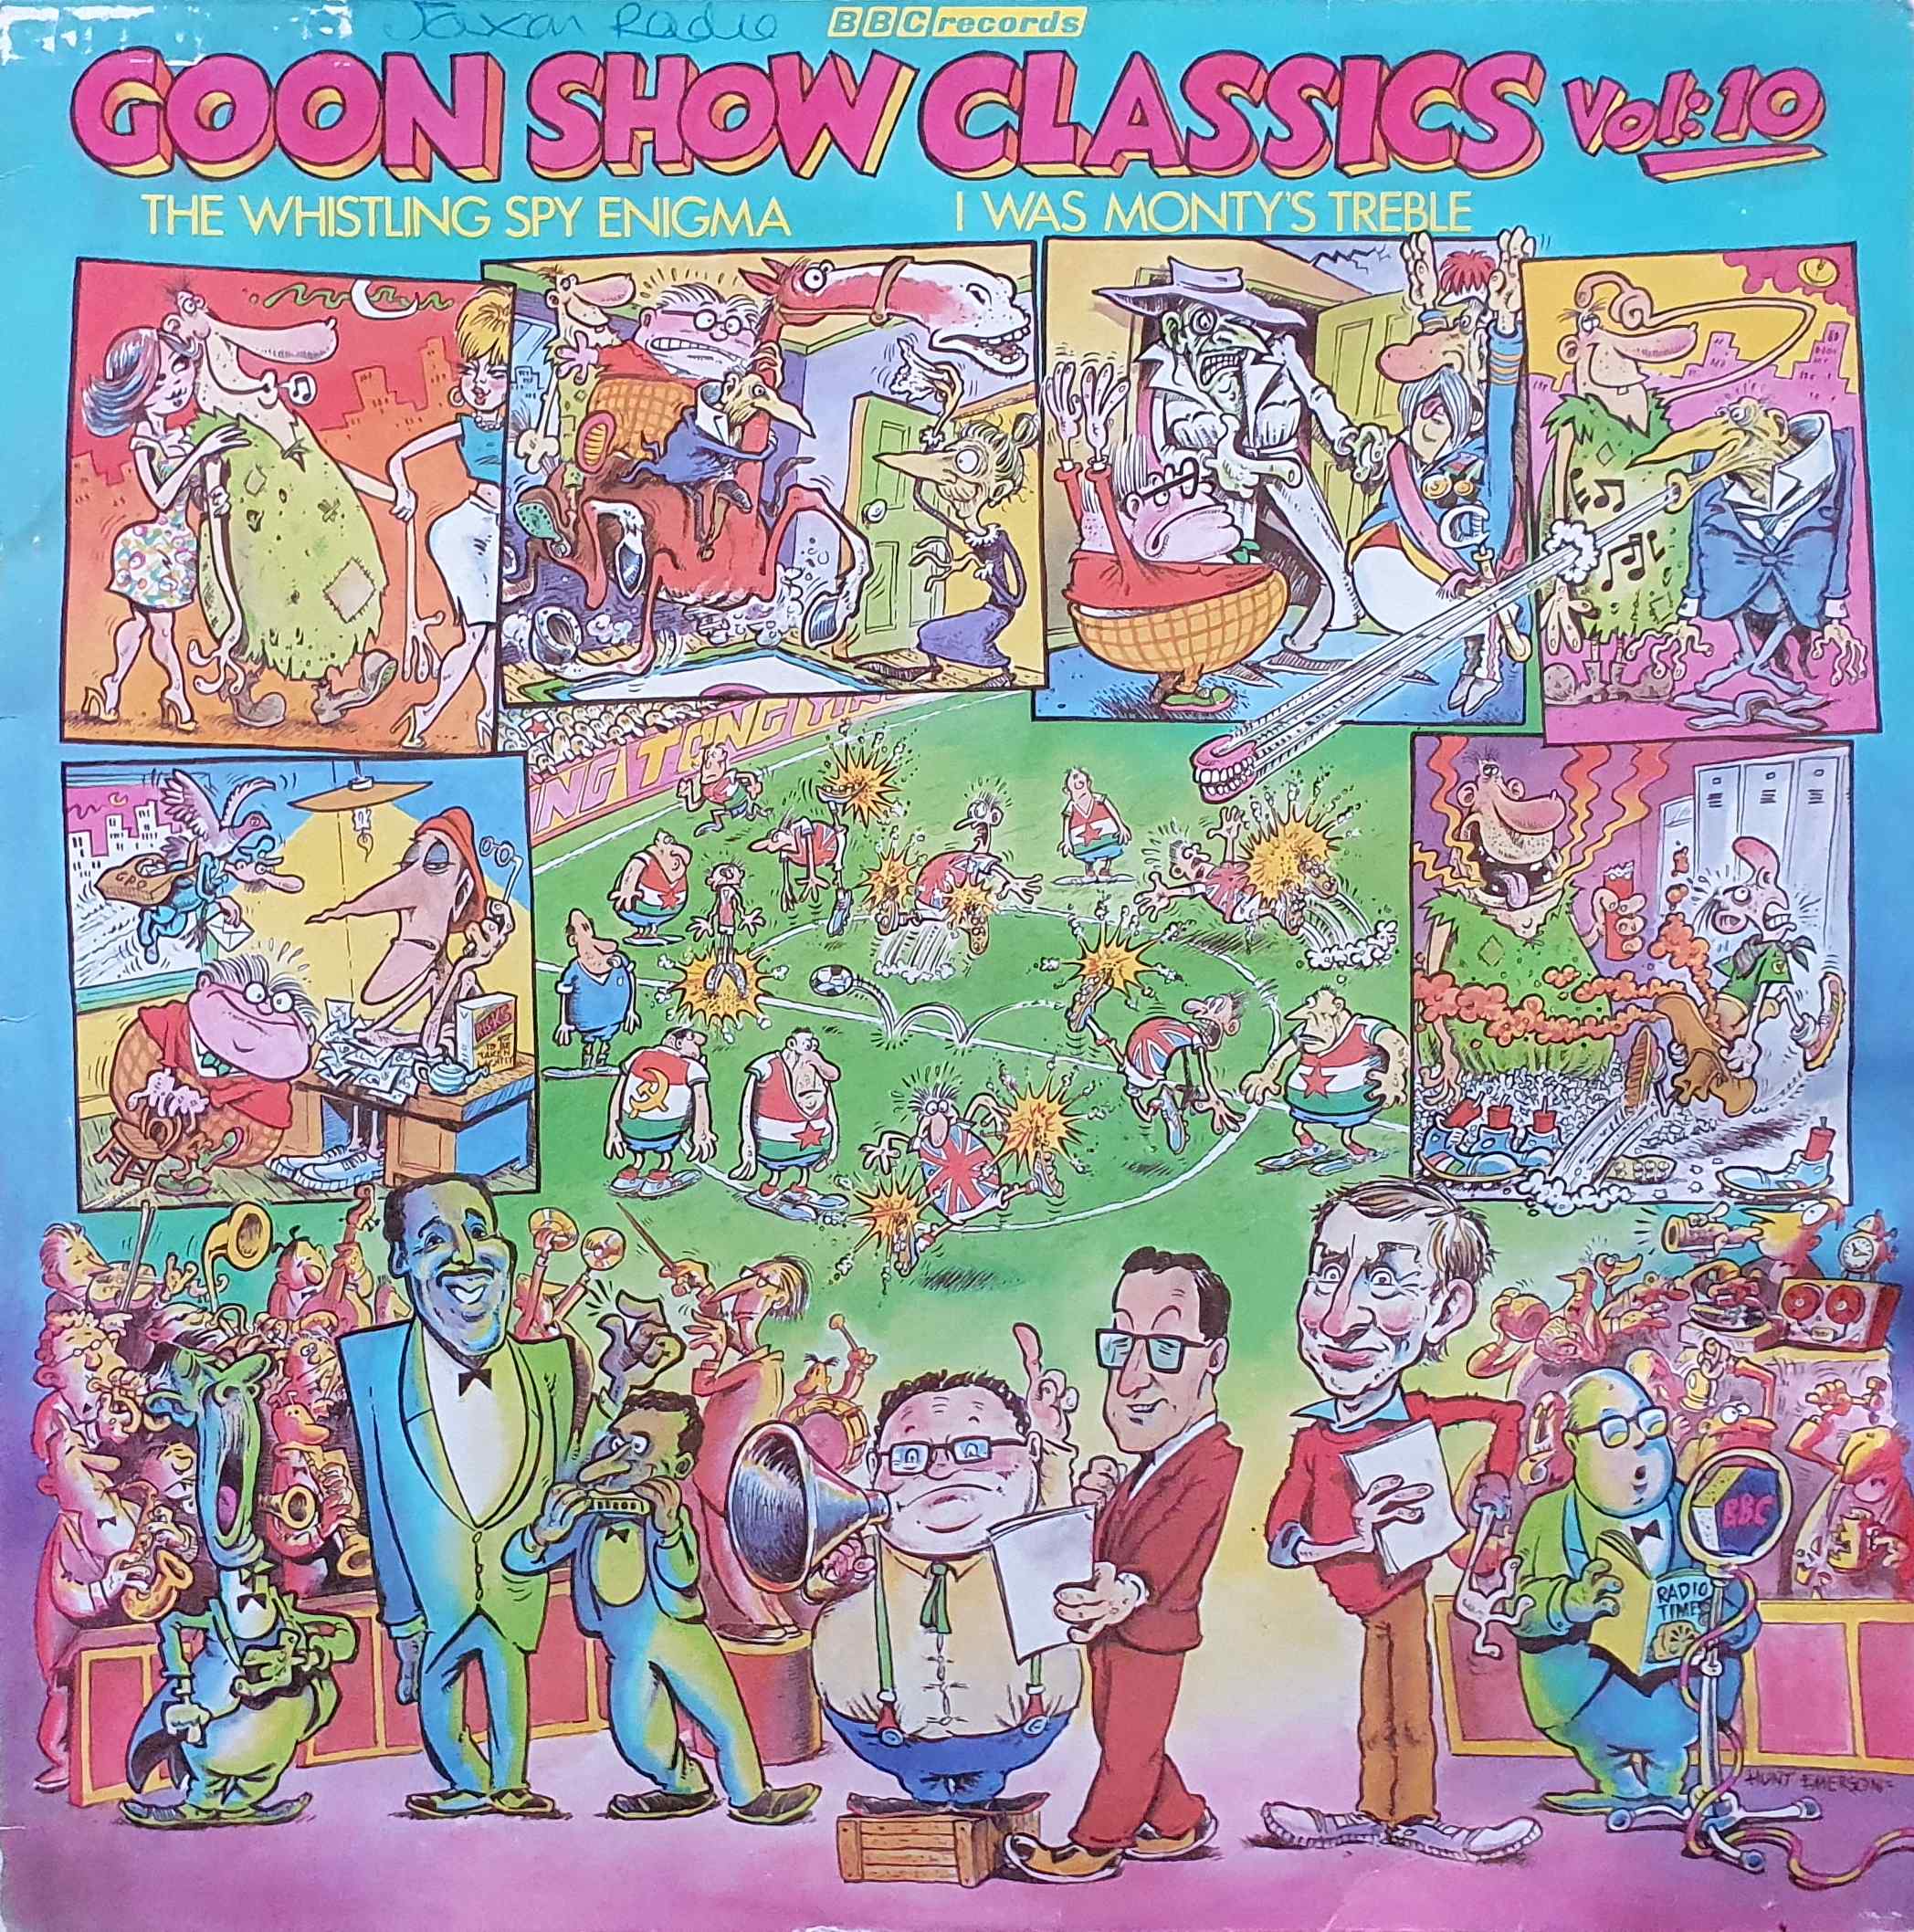 Picture of REB 481 Goon show classics - Volume 10 by artist Spike Milligan from the BBC records and Tapes library